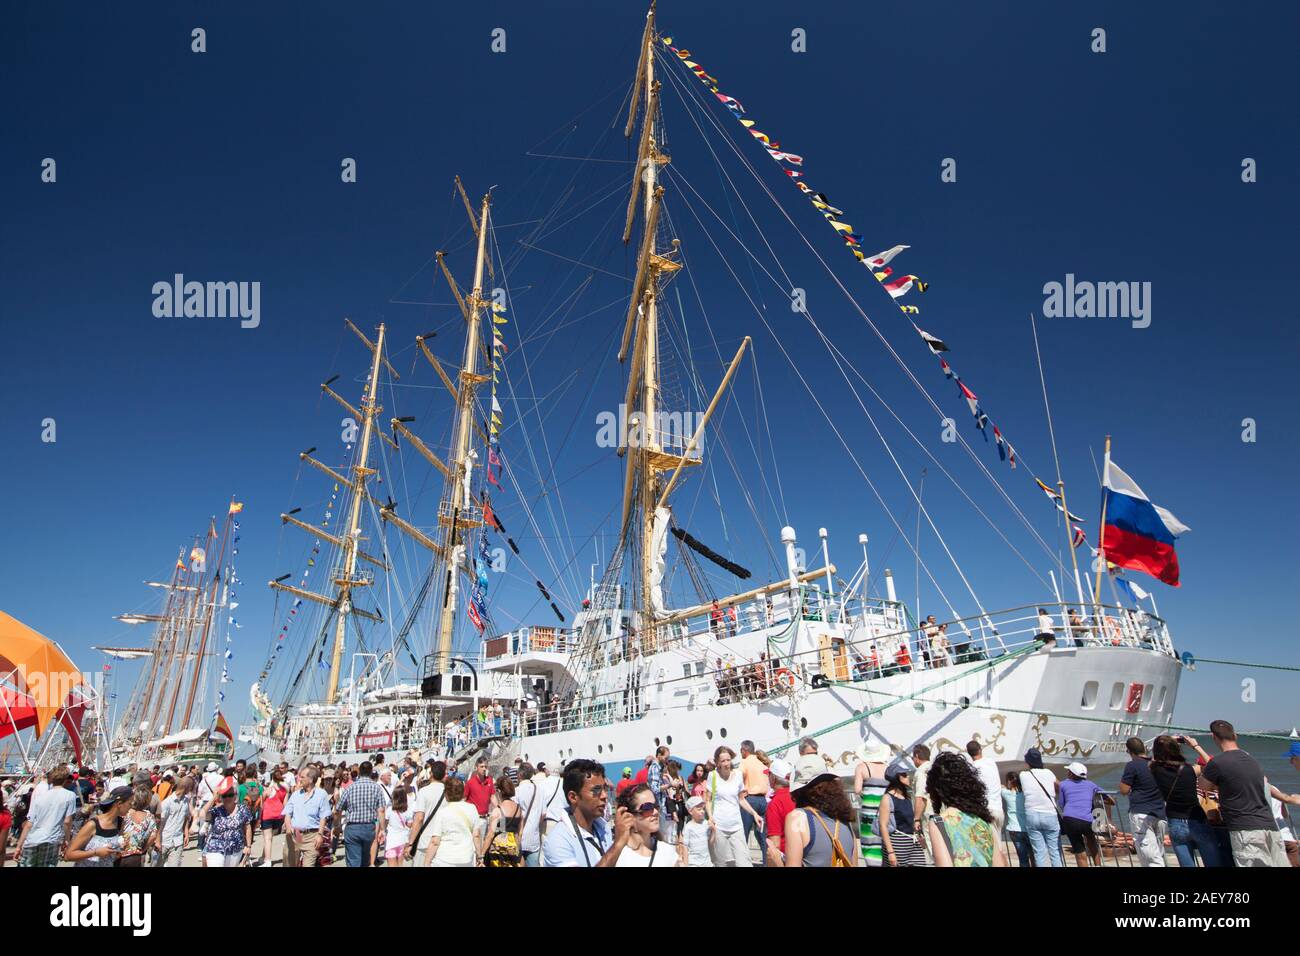 Russian full rigged training ship Mir at Tall Ship Festival in Lisbon, Portugal. Stock Photo